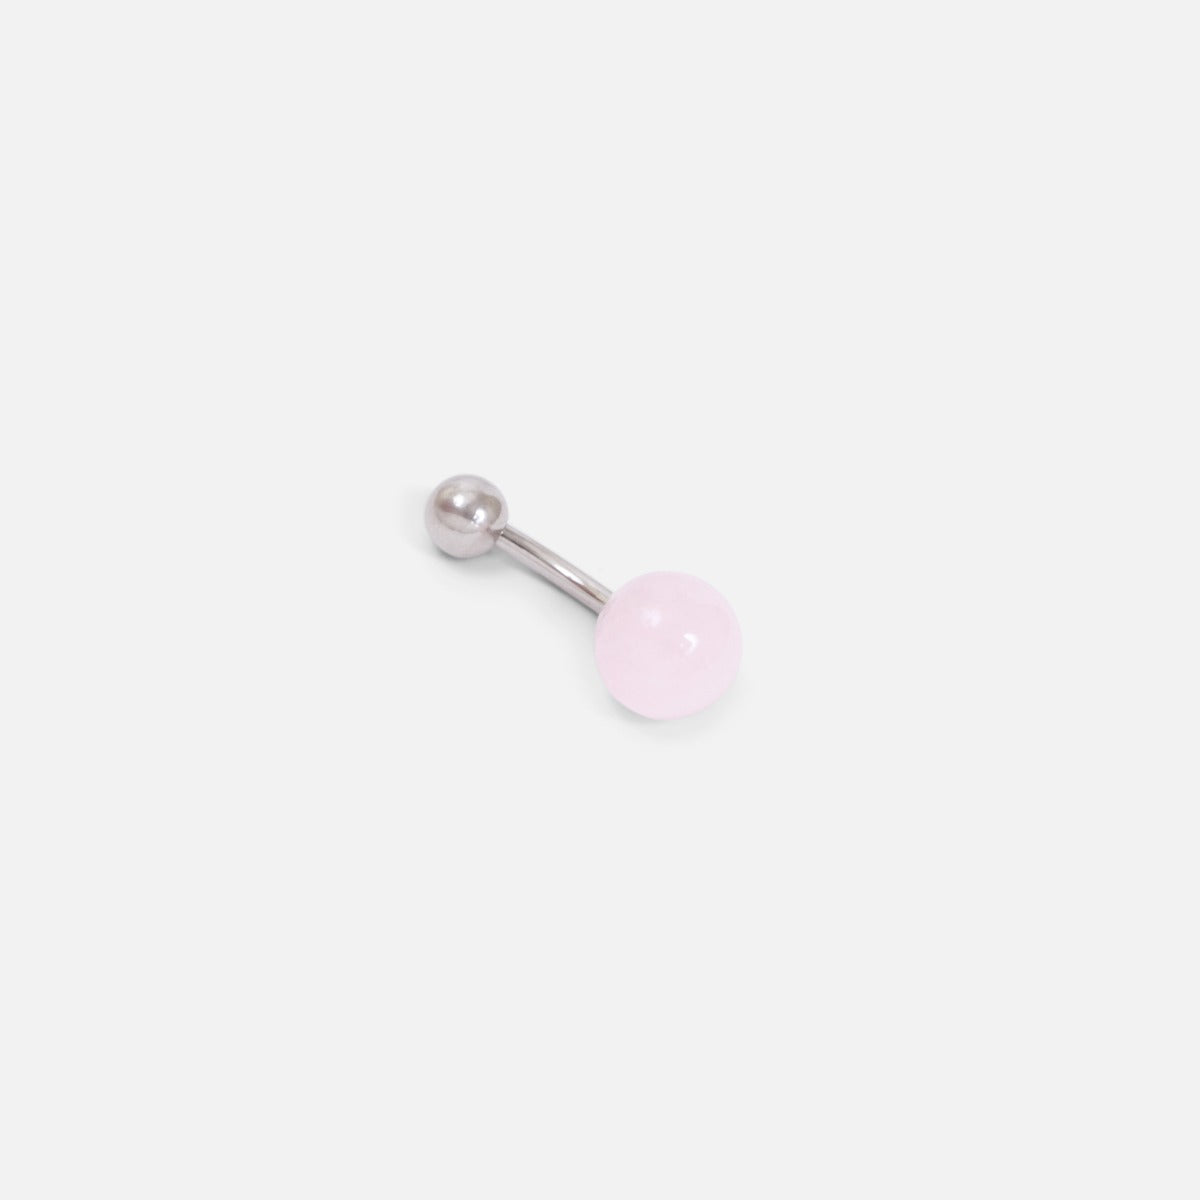 Silvered stainless steel belly button ring with quartz pink stone 